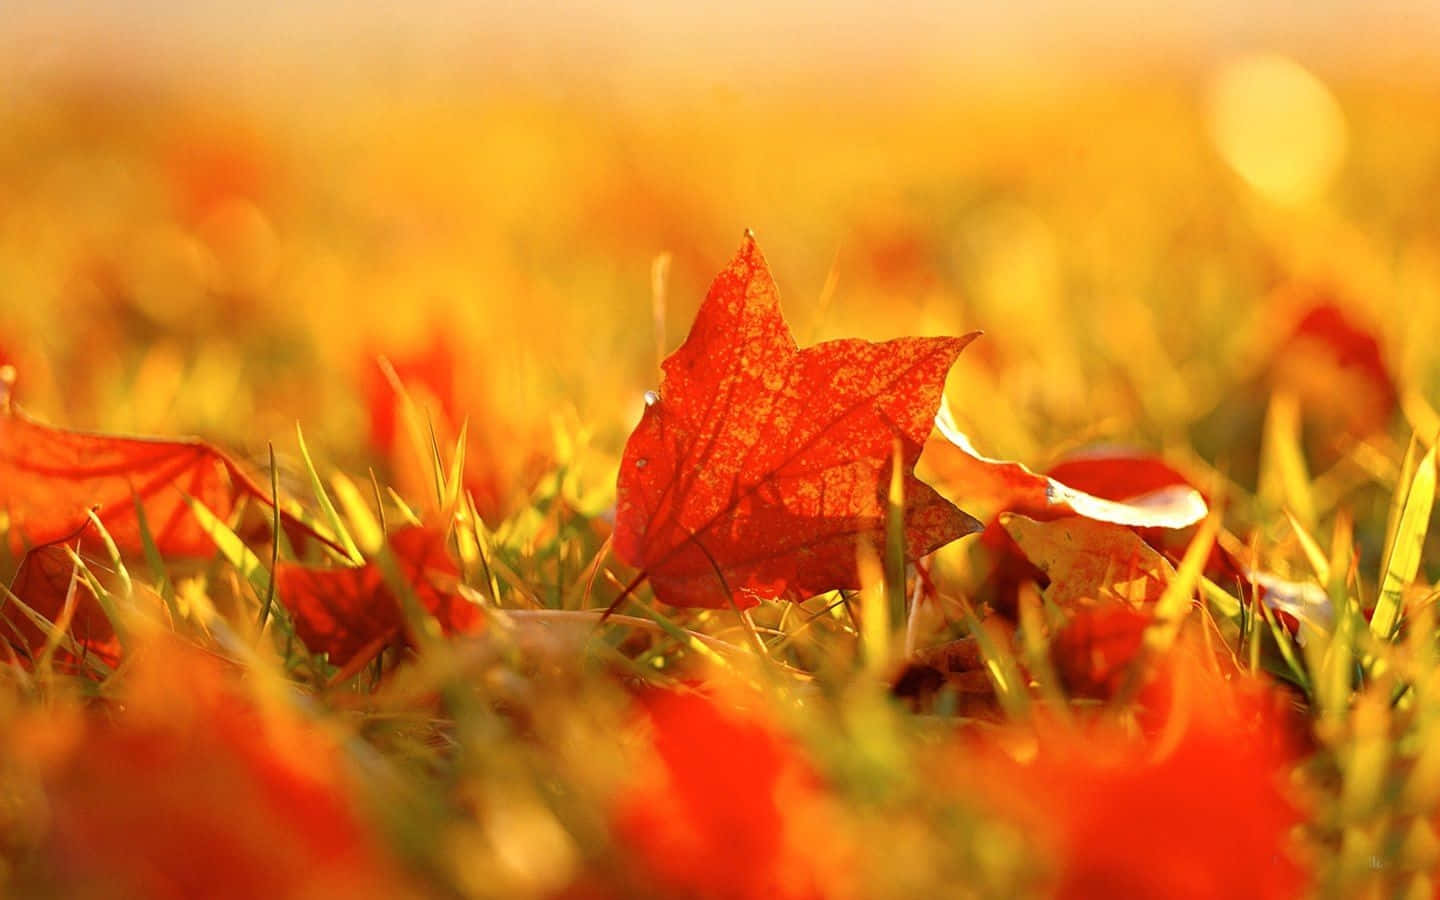 "The Colors of Fall" Wallpaper